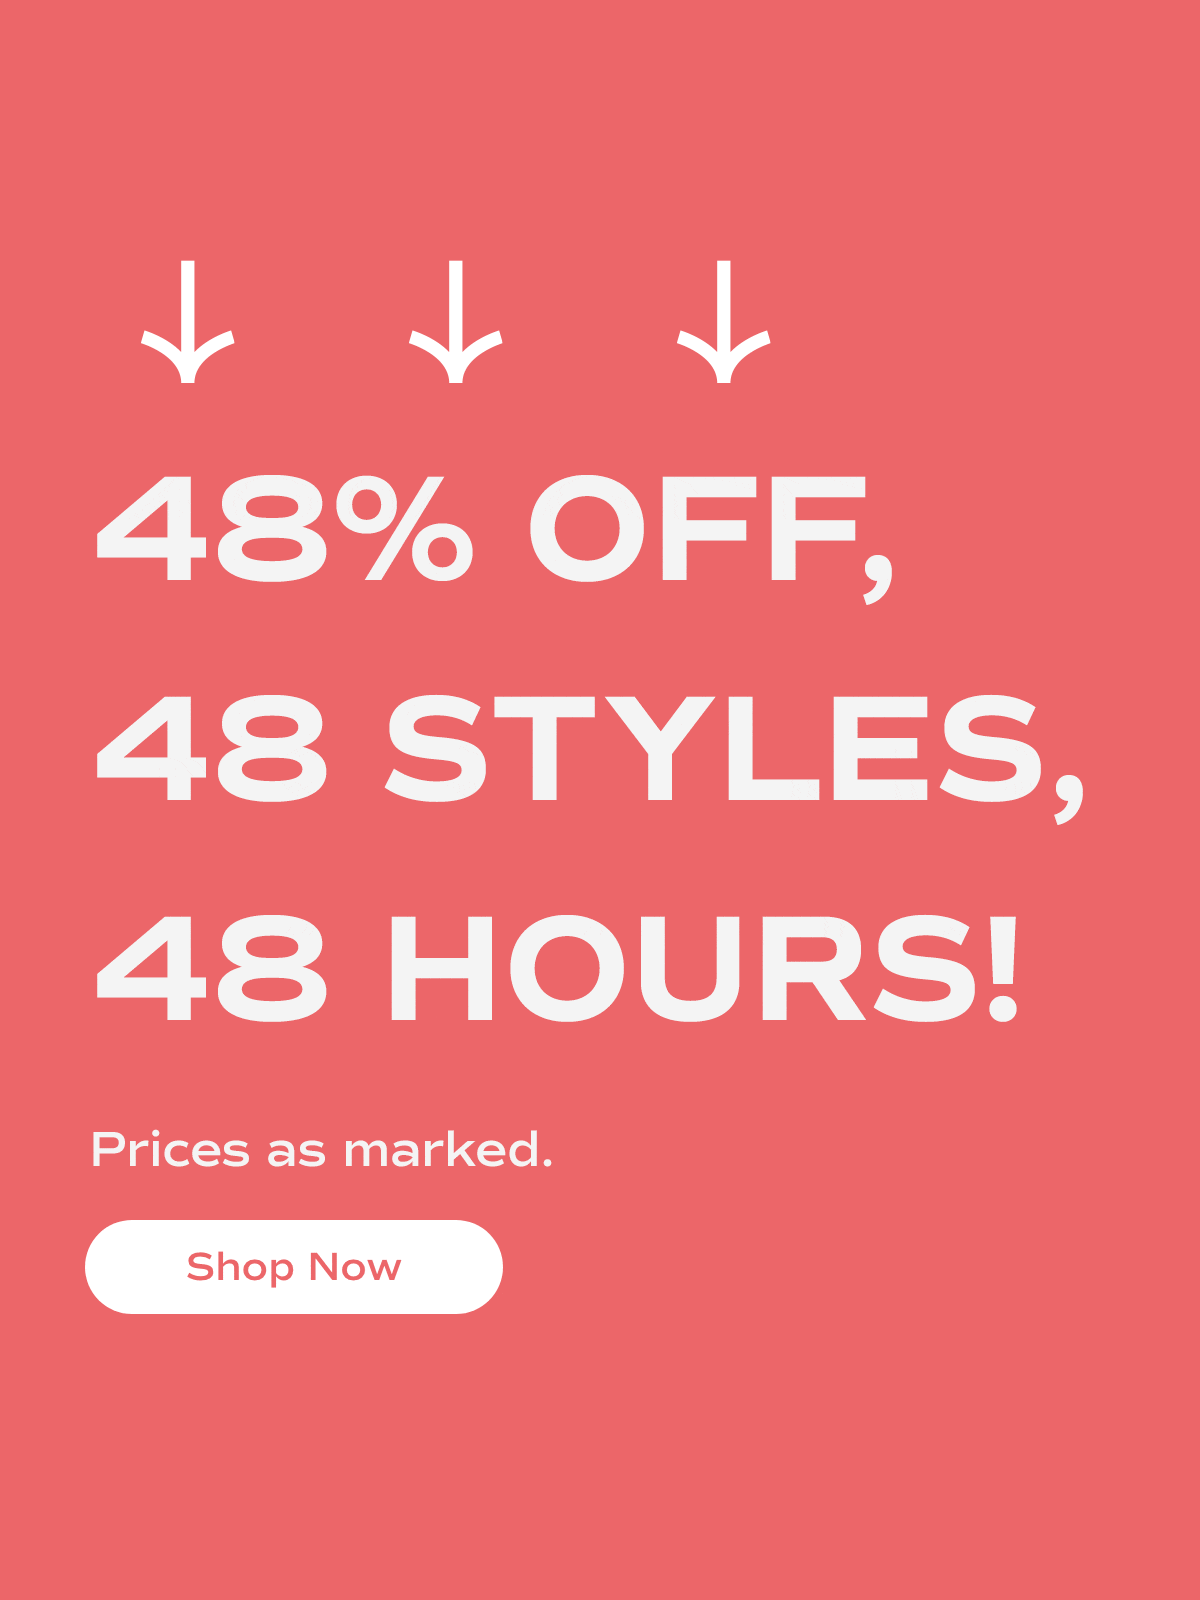 48% Off, 48 Styles, 48 Hours! Prices as marked. Shop Now